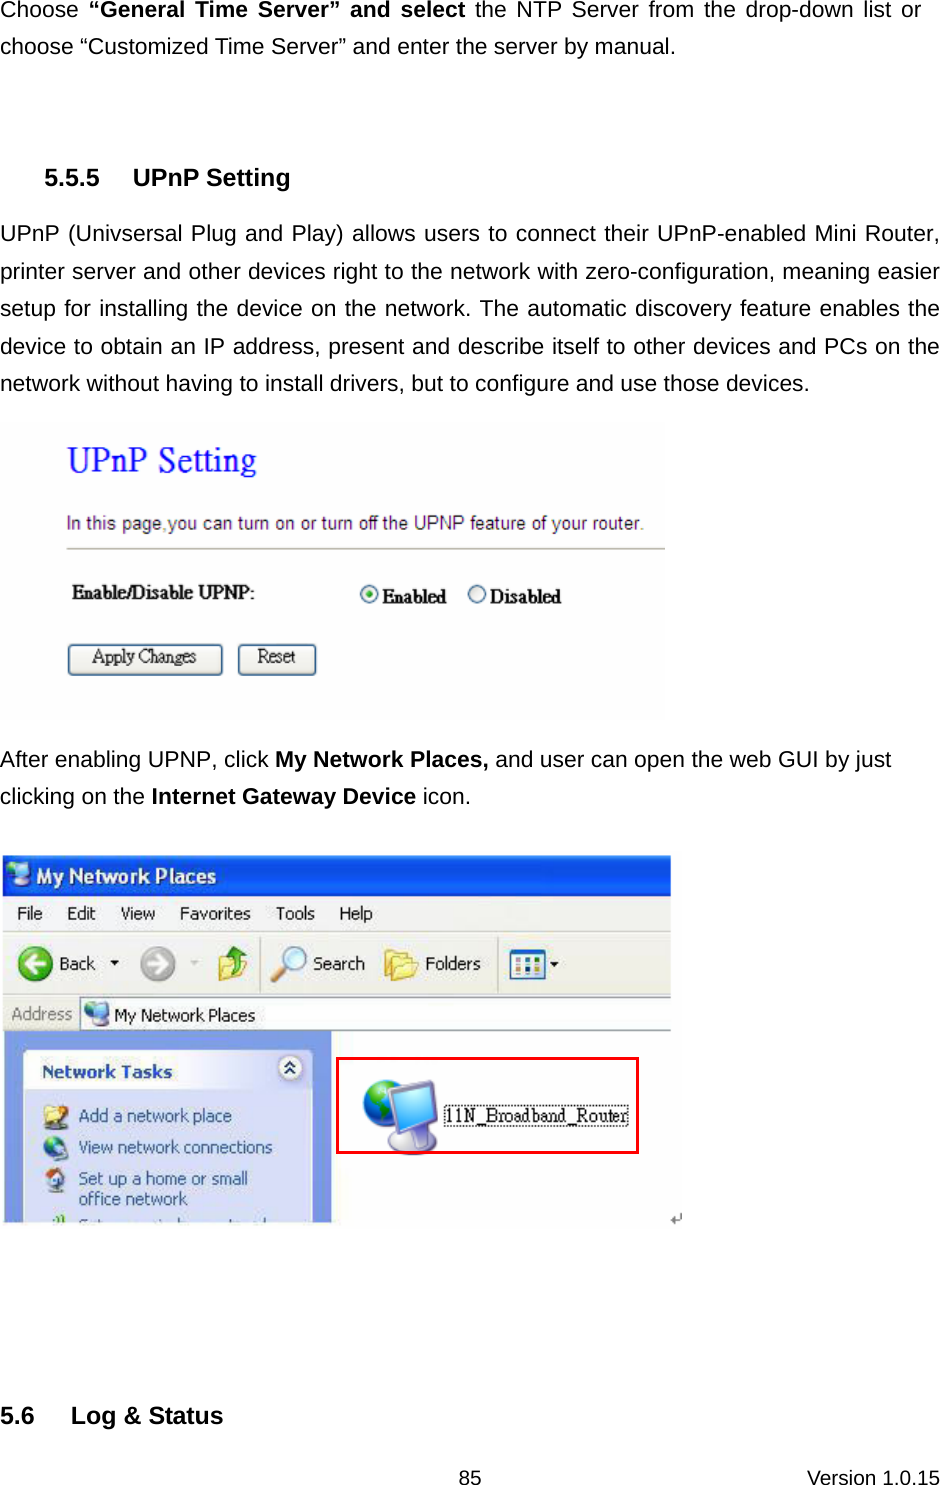 Version 1.0.15 85Choose “General Time Server” and select the NTP Server from the drop-down list or choose “Customized Time Server” and enter the server by manual.  5.5.5 UPnP Setting UPnP (Univsersal Plug and Play) allows users to connect their UPnP-enabled Mini Router, printer server and other devices right to the network with zero-configuration, meaning easier setup for installing the device on the network. The automatic discovery feature enables the device to obtain an IP address, present and describe itself to other devices and PCs on the network without having to install drivers, but to configure and use those devices.    After enabling UPNP, click My Network Places, and user can open the web GUI by just clicking on the Internet Gateway Device icon.     5.6  Log &amp; Status 